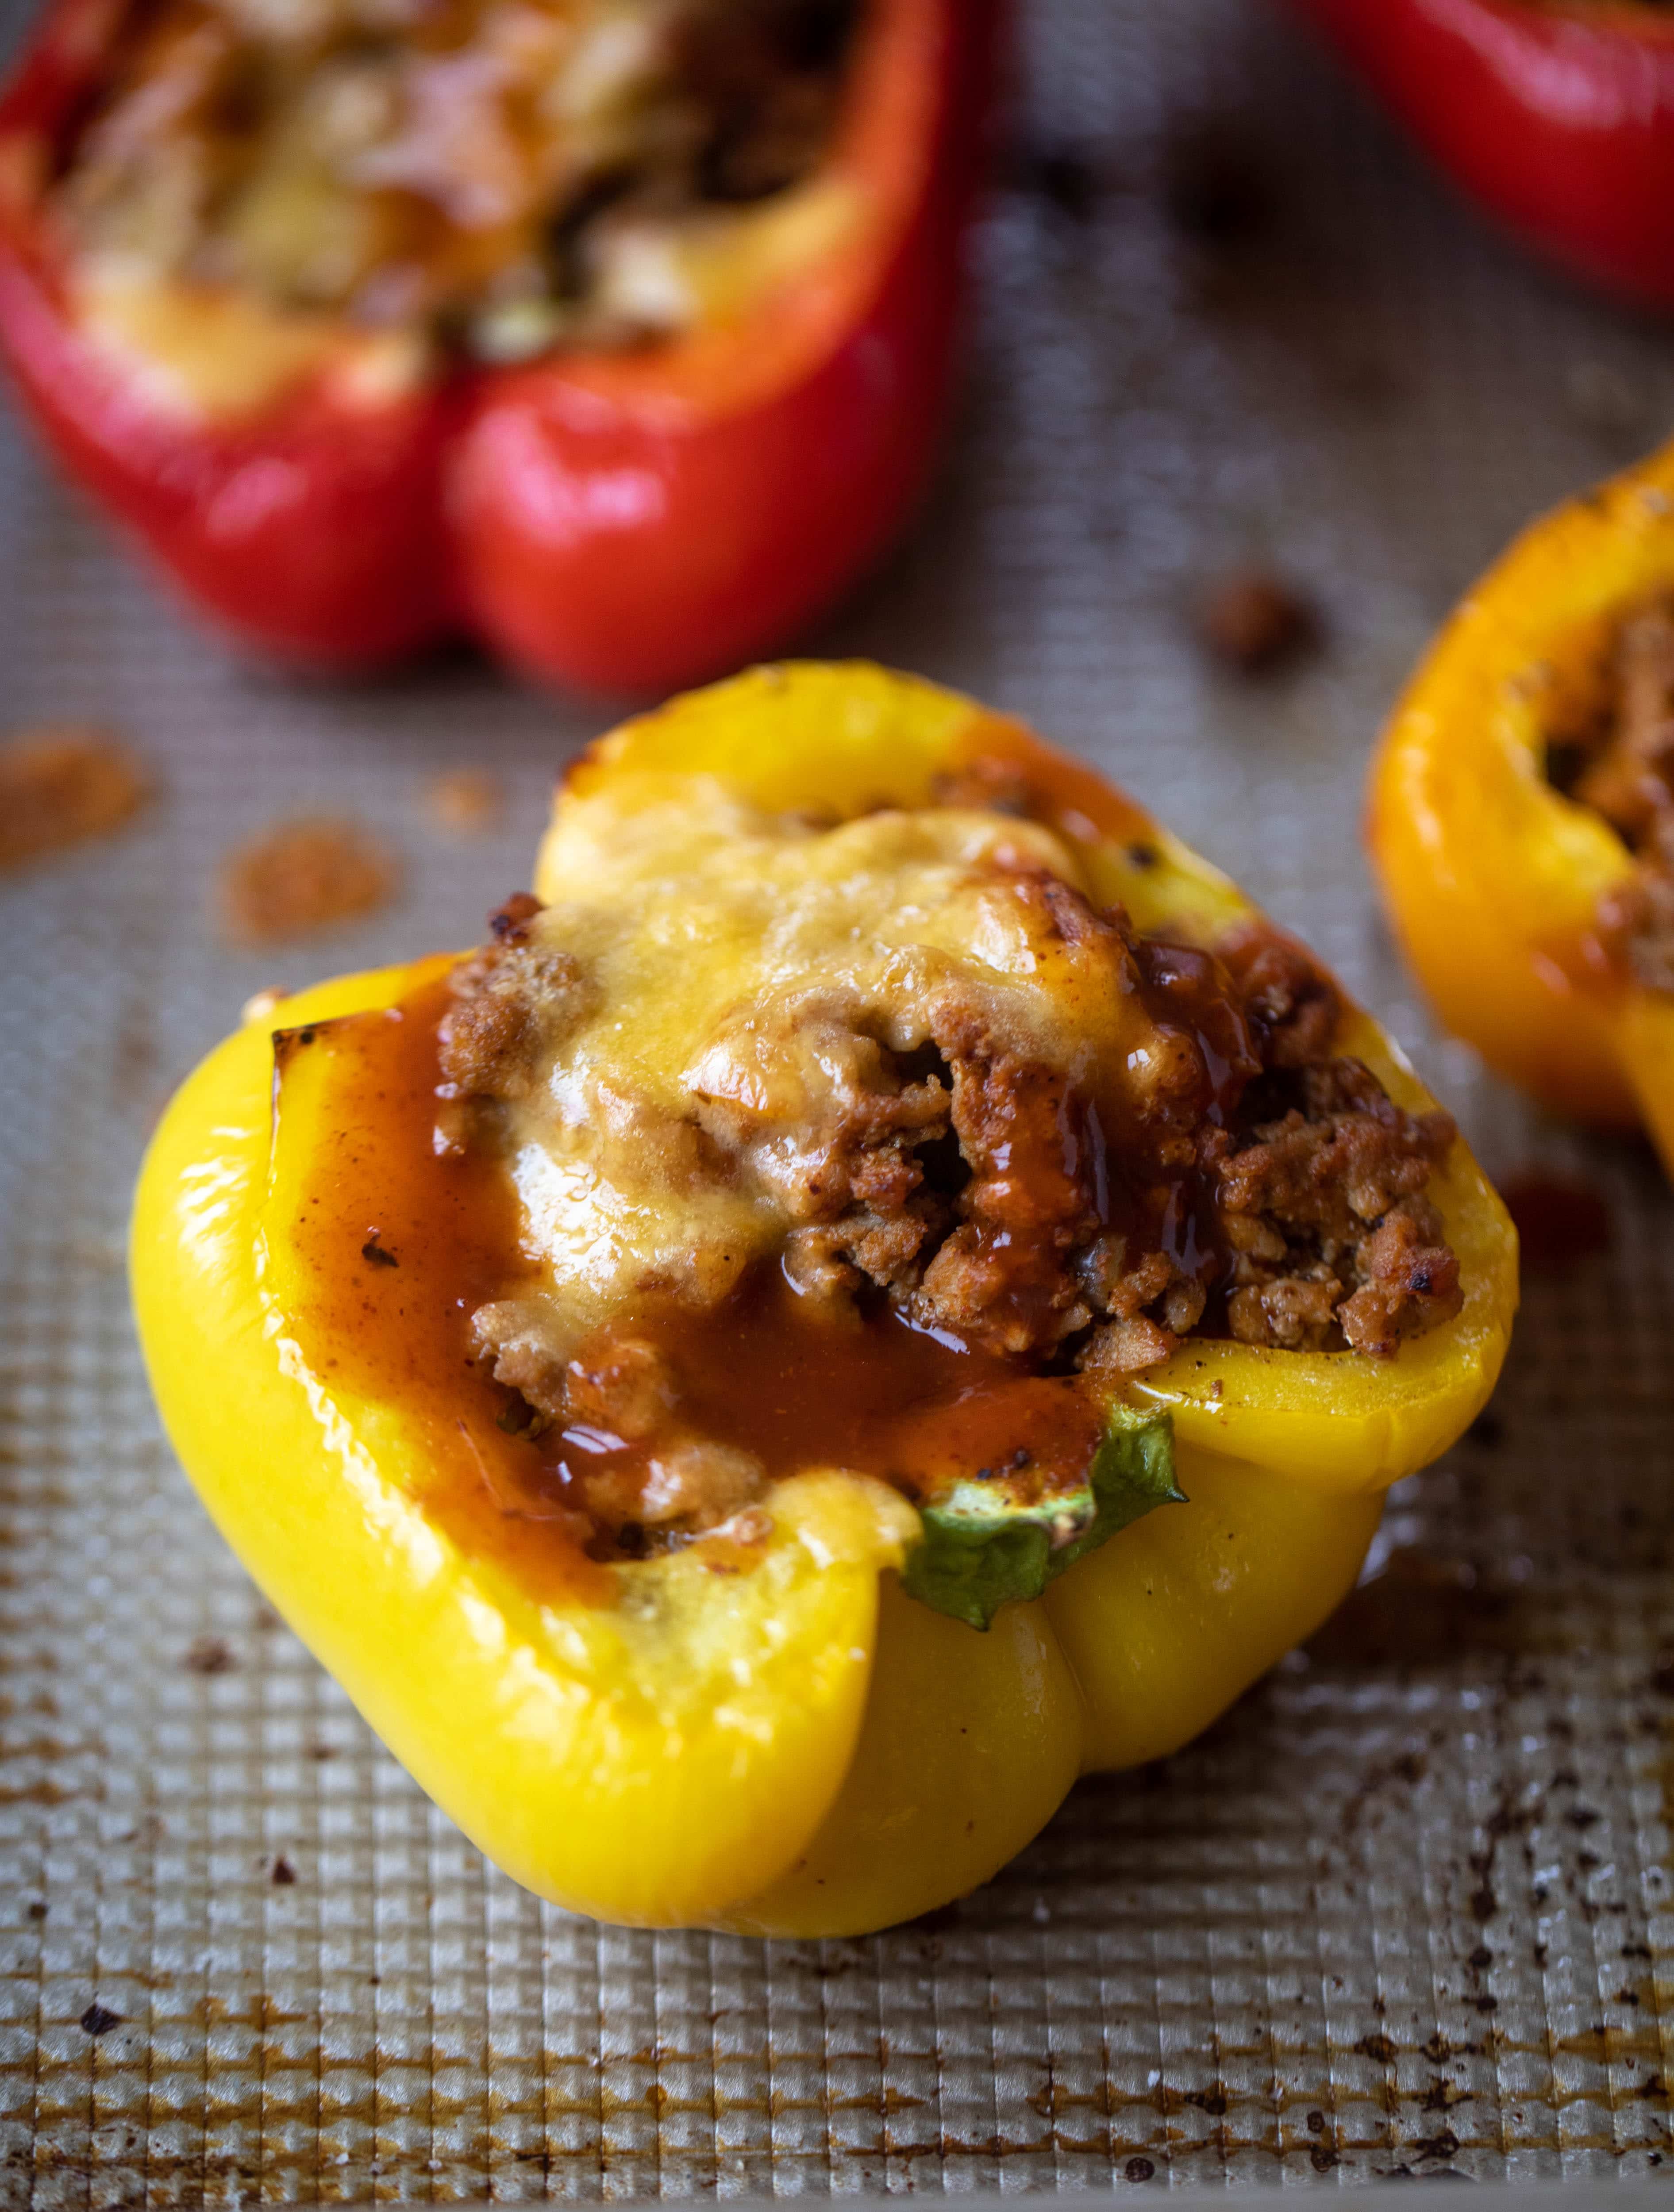 My favorite ground turkey taco stuffed peppers are the best weeknight meal! The turkey is flavorful and juicy. The peppers are deliciously roasted. Yum!